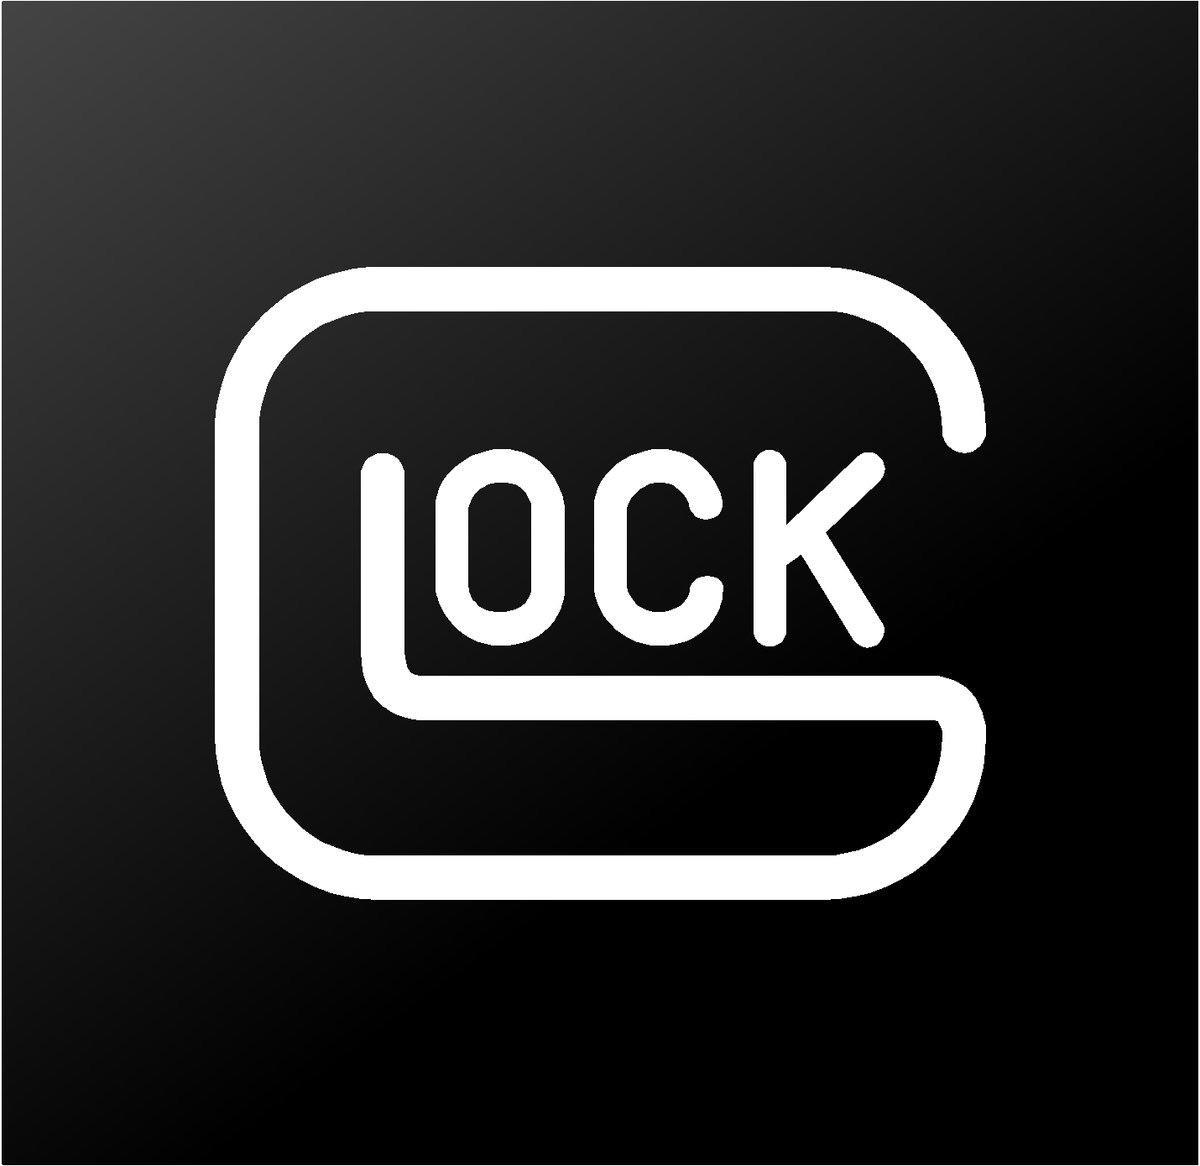 Team Glock Logo - Can we have some appreciation for the glock logo : DesignPorn